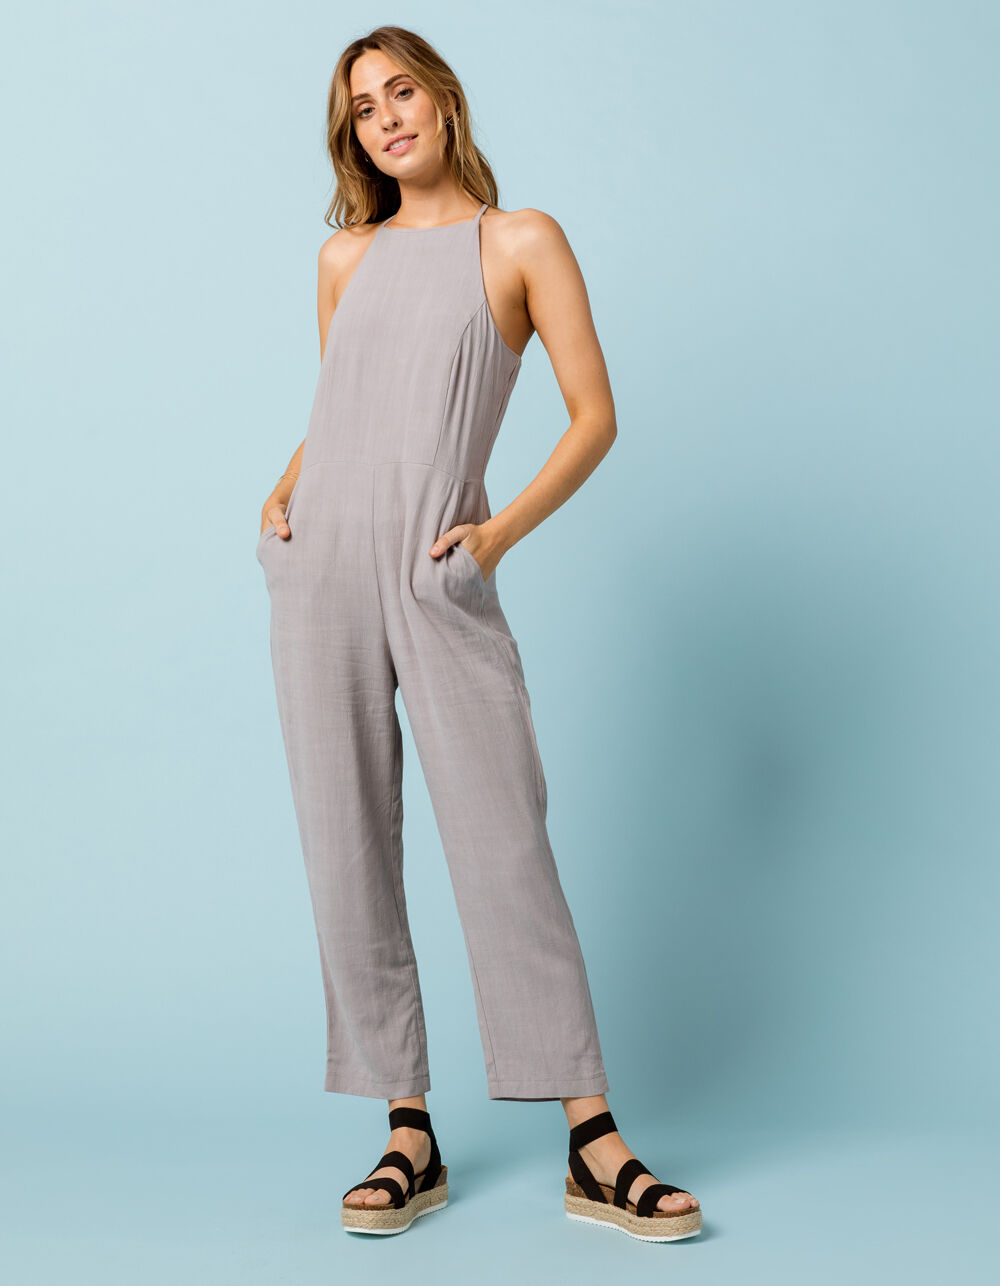 WEST OF MELROSE On Key Gray Womens Jumpsuit - GRAY | Tillys